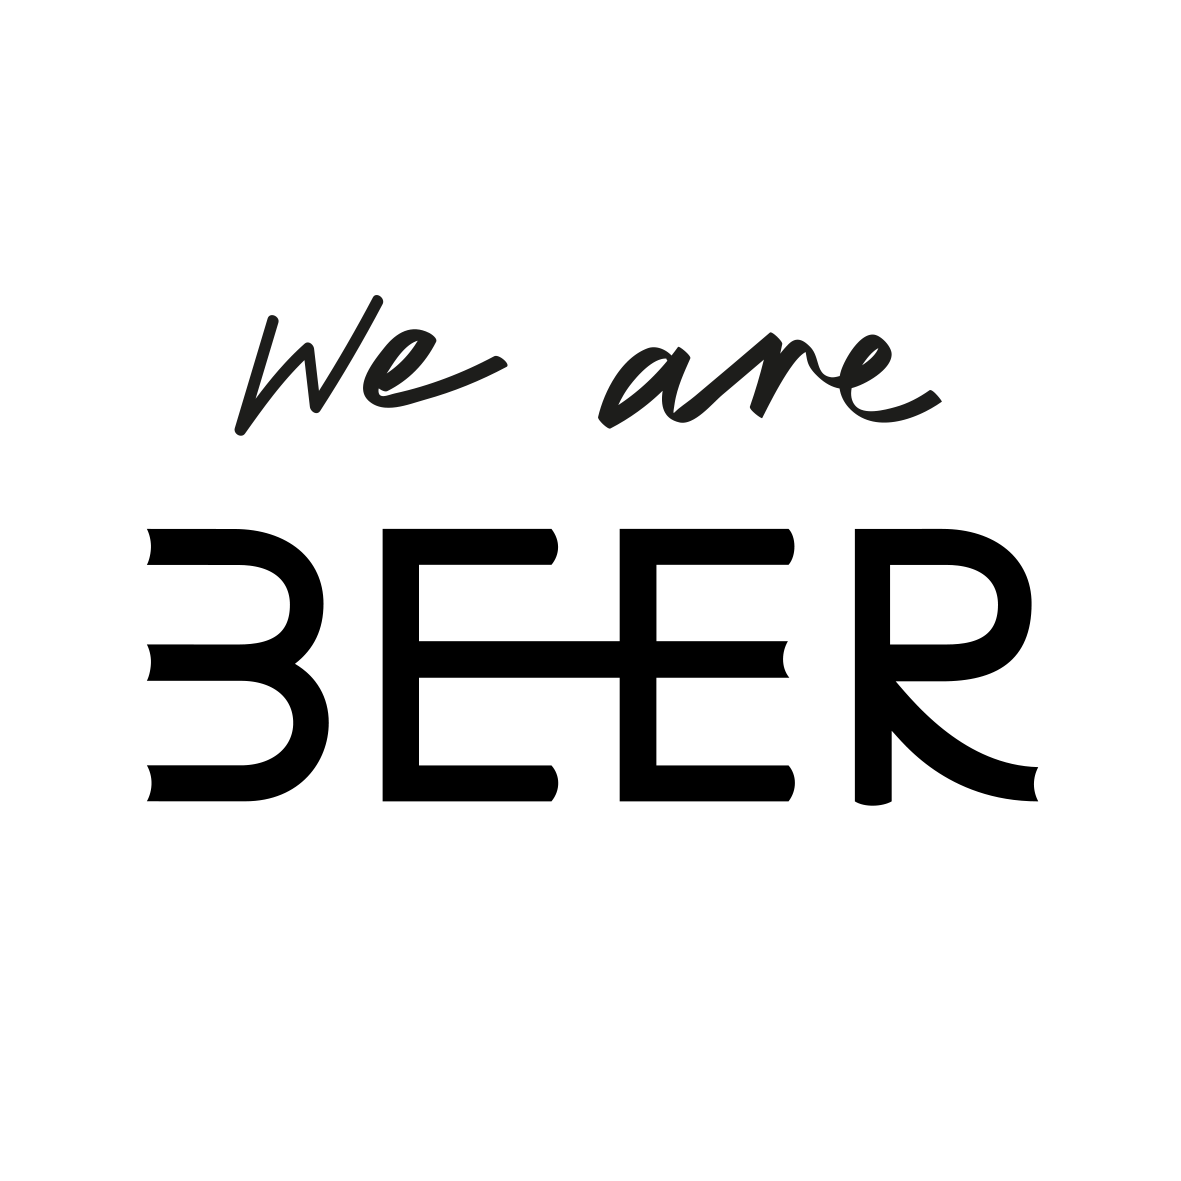 We Are Beer